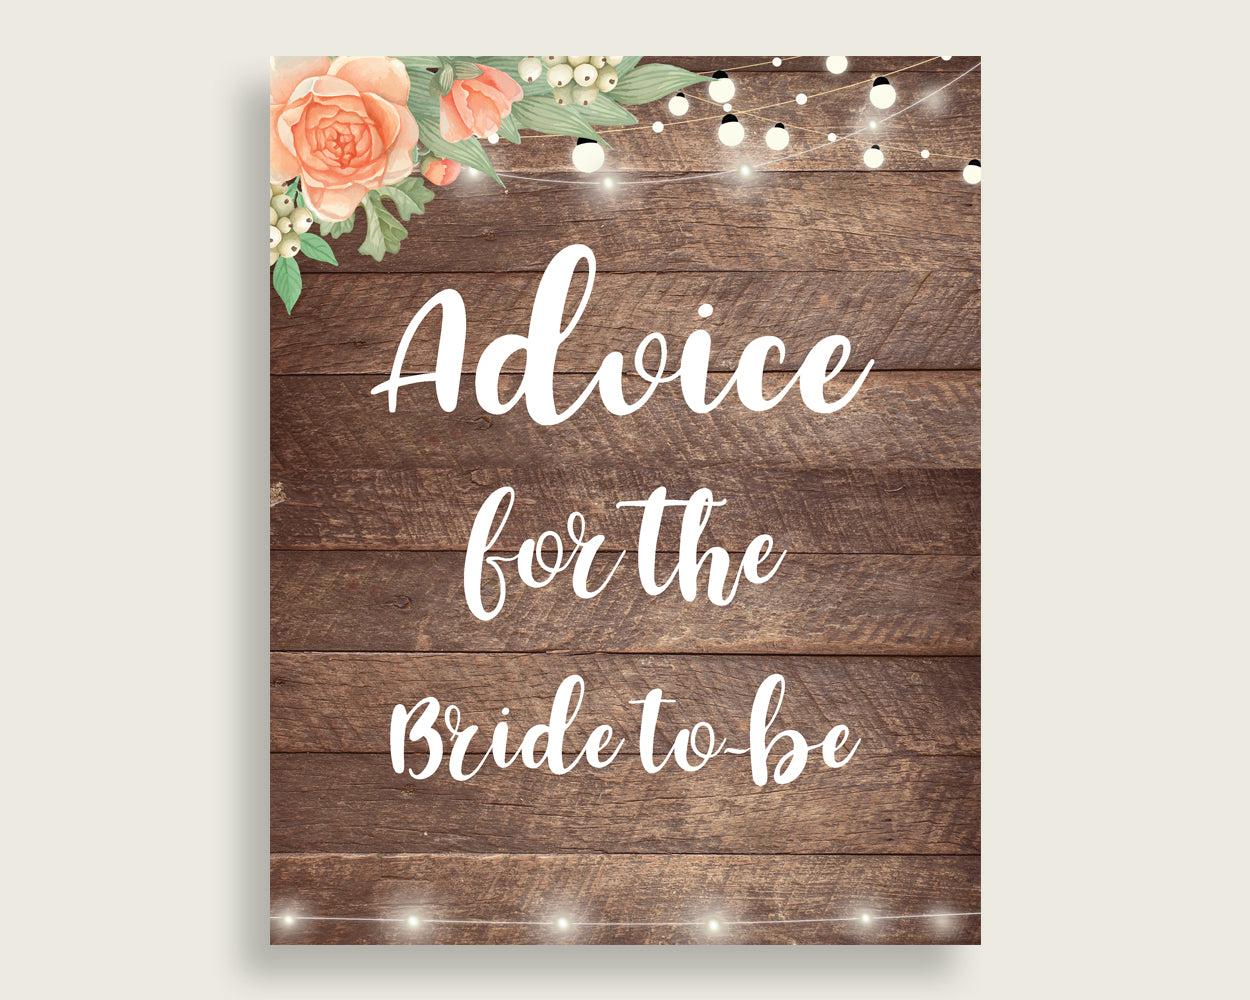 Advice Cards Bridal Shower Advice Cards Rustic Bridal Shower Advice Cards Bridal Shower Flowers Advice Cards Brown Beige party decor SC4GE